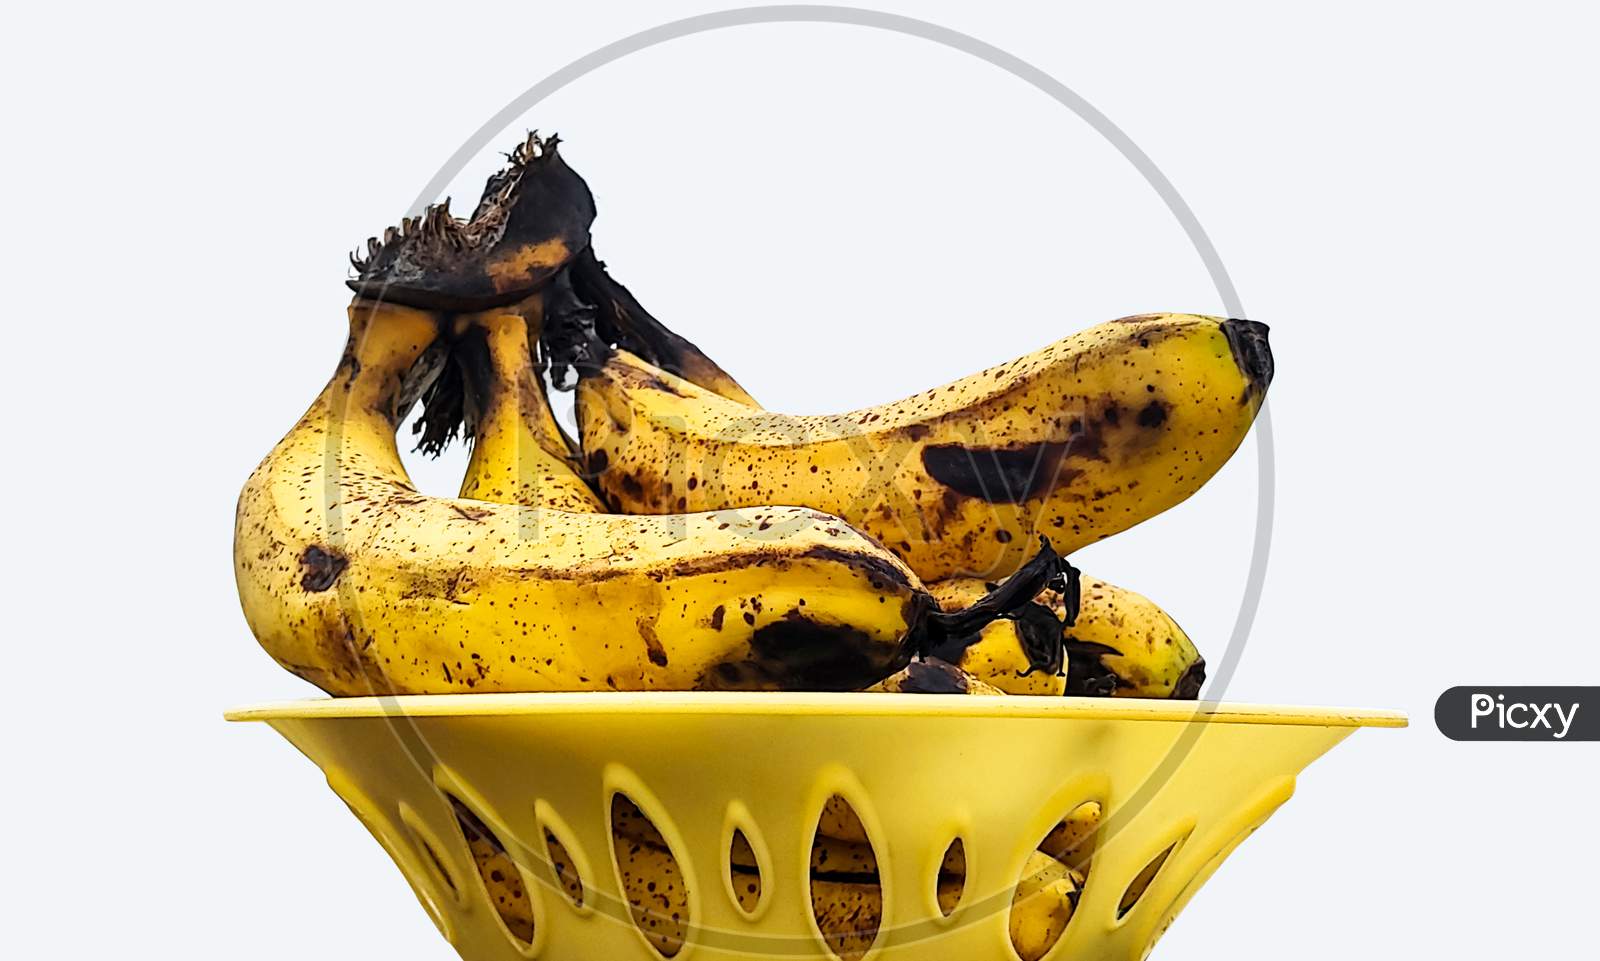 Ripe Yellow Bananas Fruits In A Basket , Bunch Of Ripe Bananas With Dark Spots